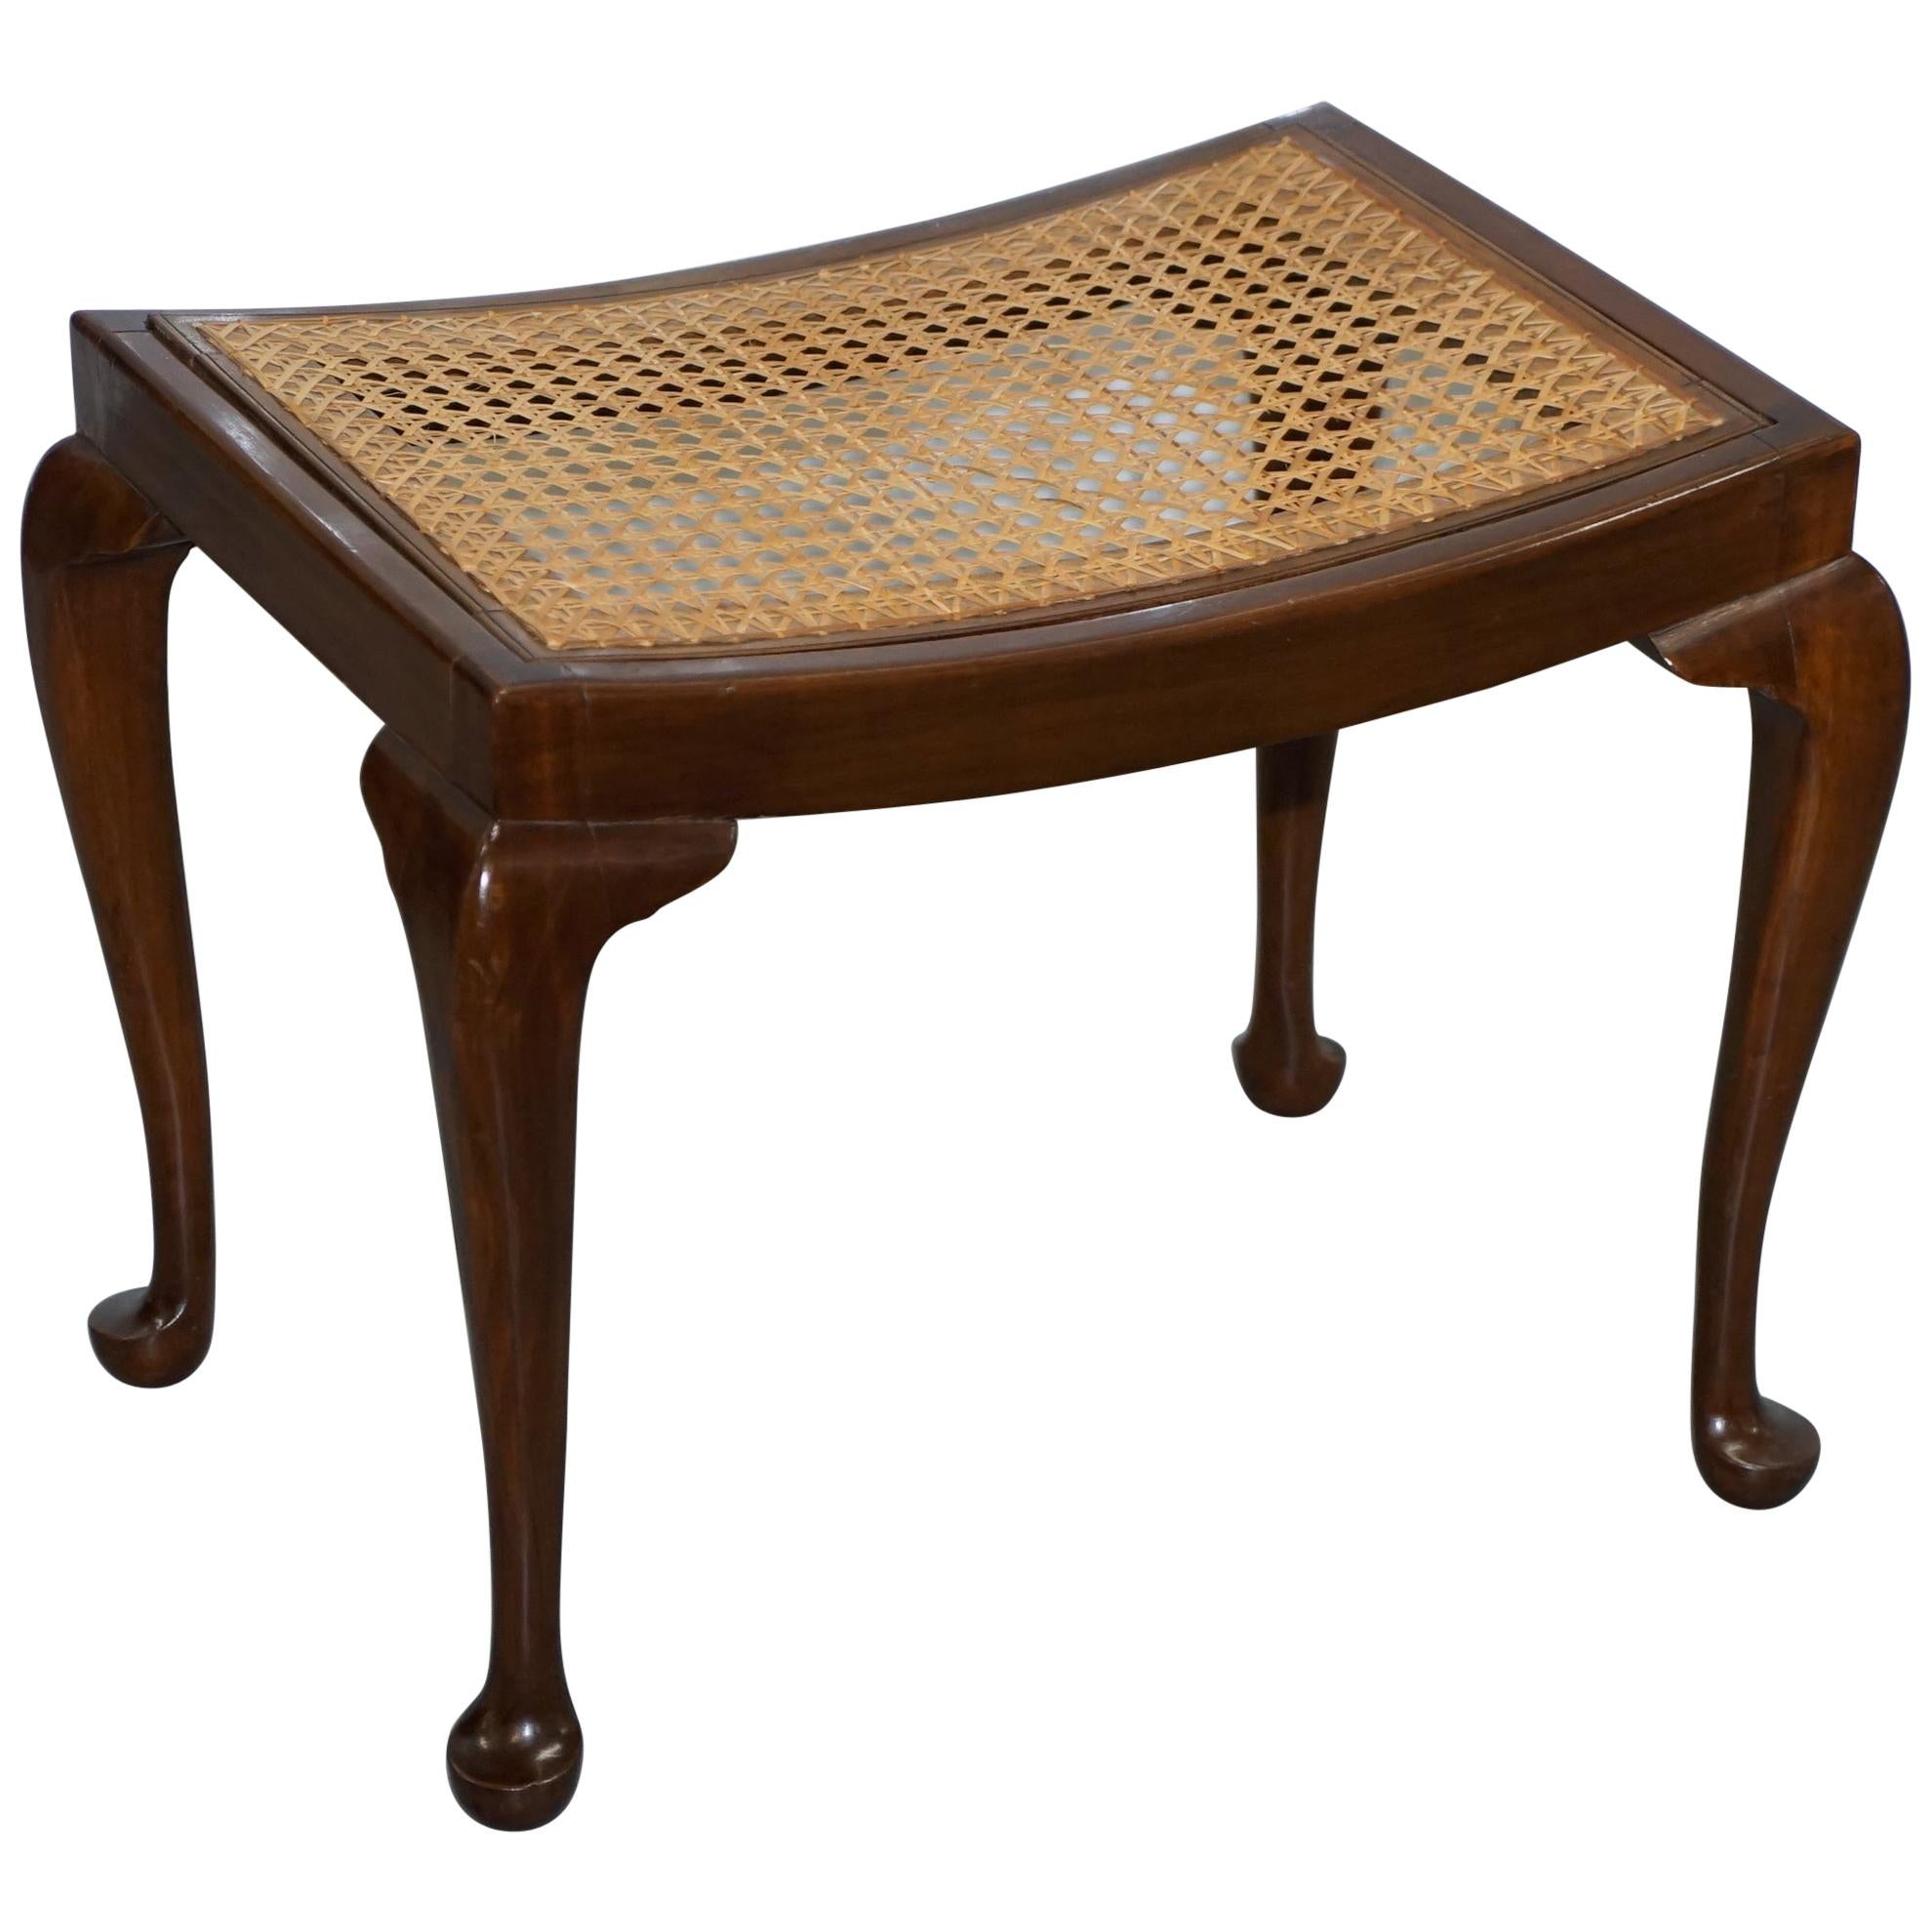 Lovely Vintage circa 1940s Rattan Berger Bench Stool Seat with Cabriolet Legs